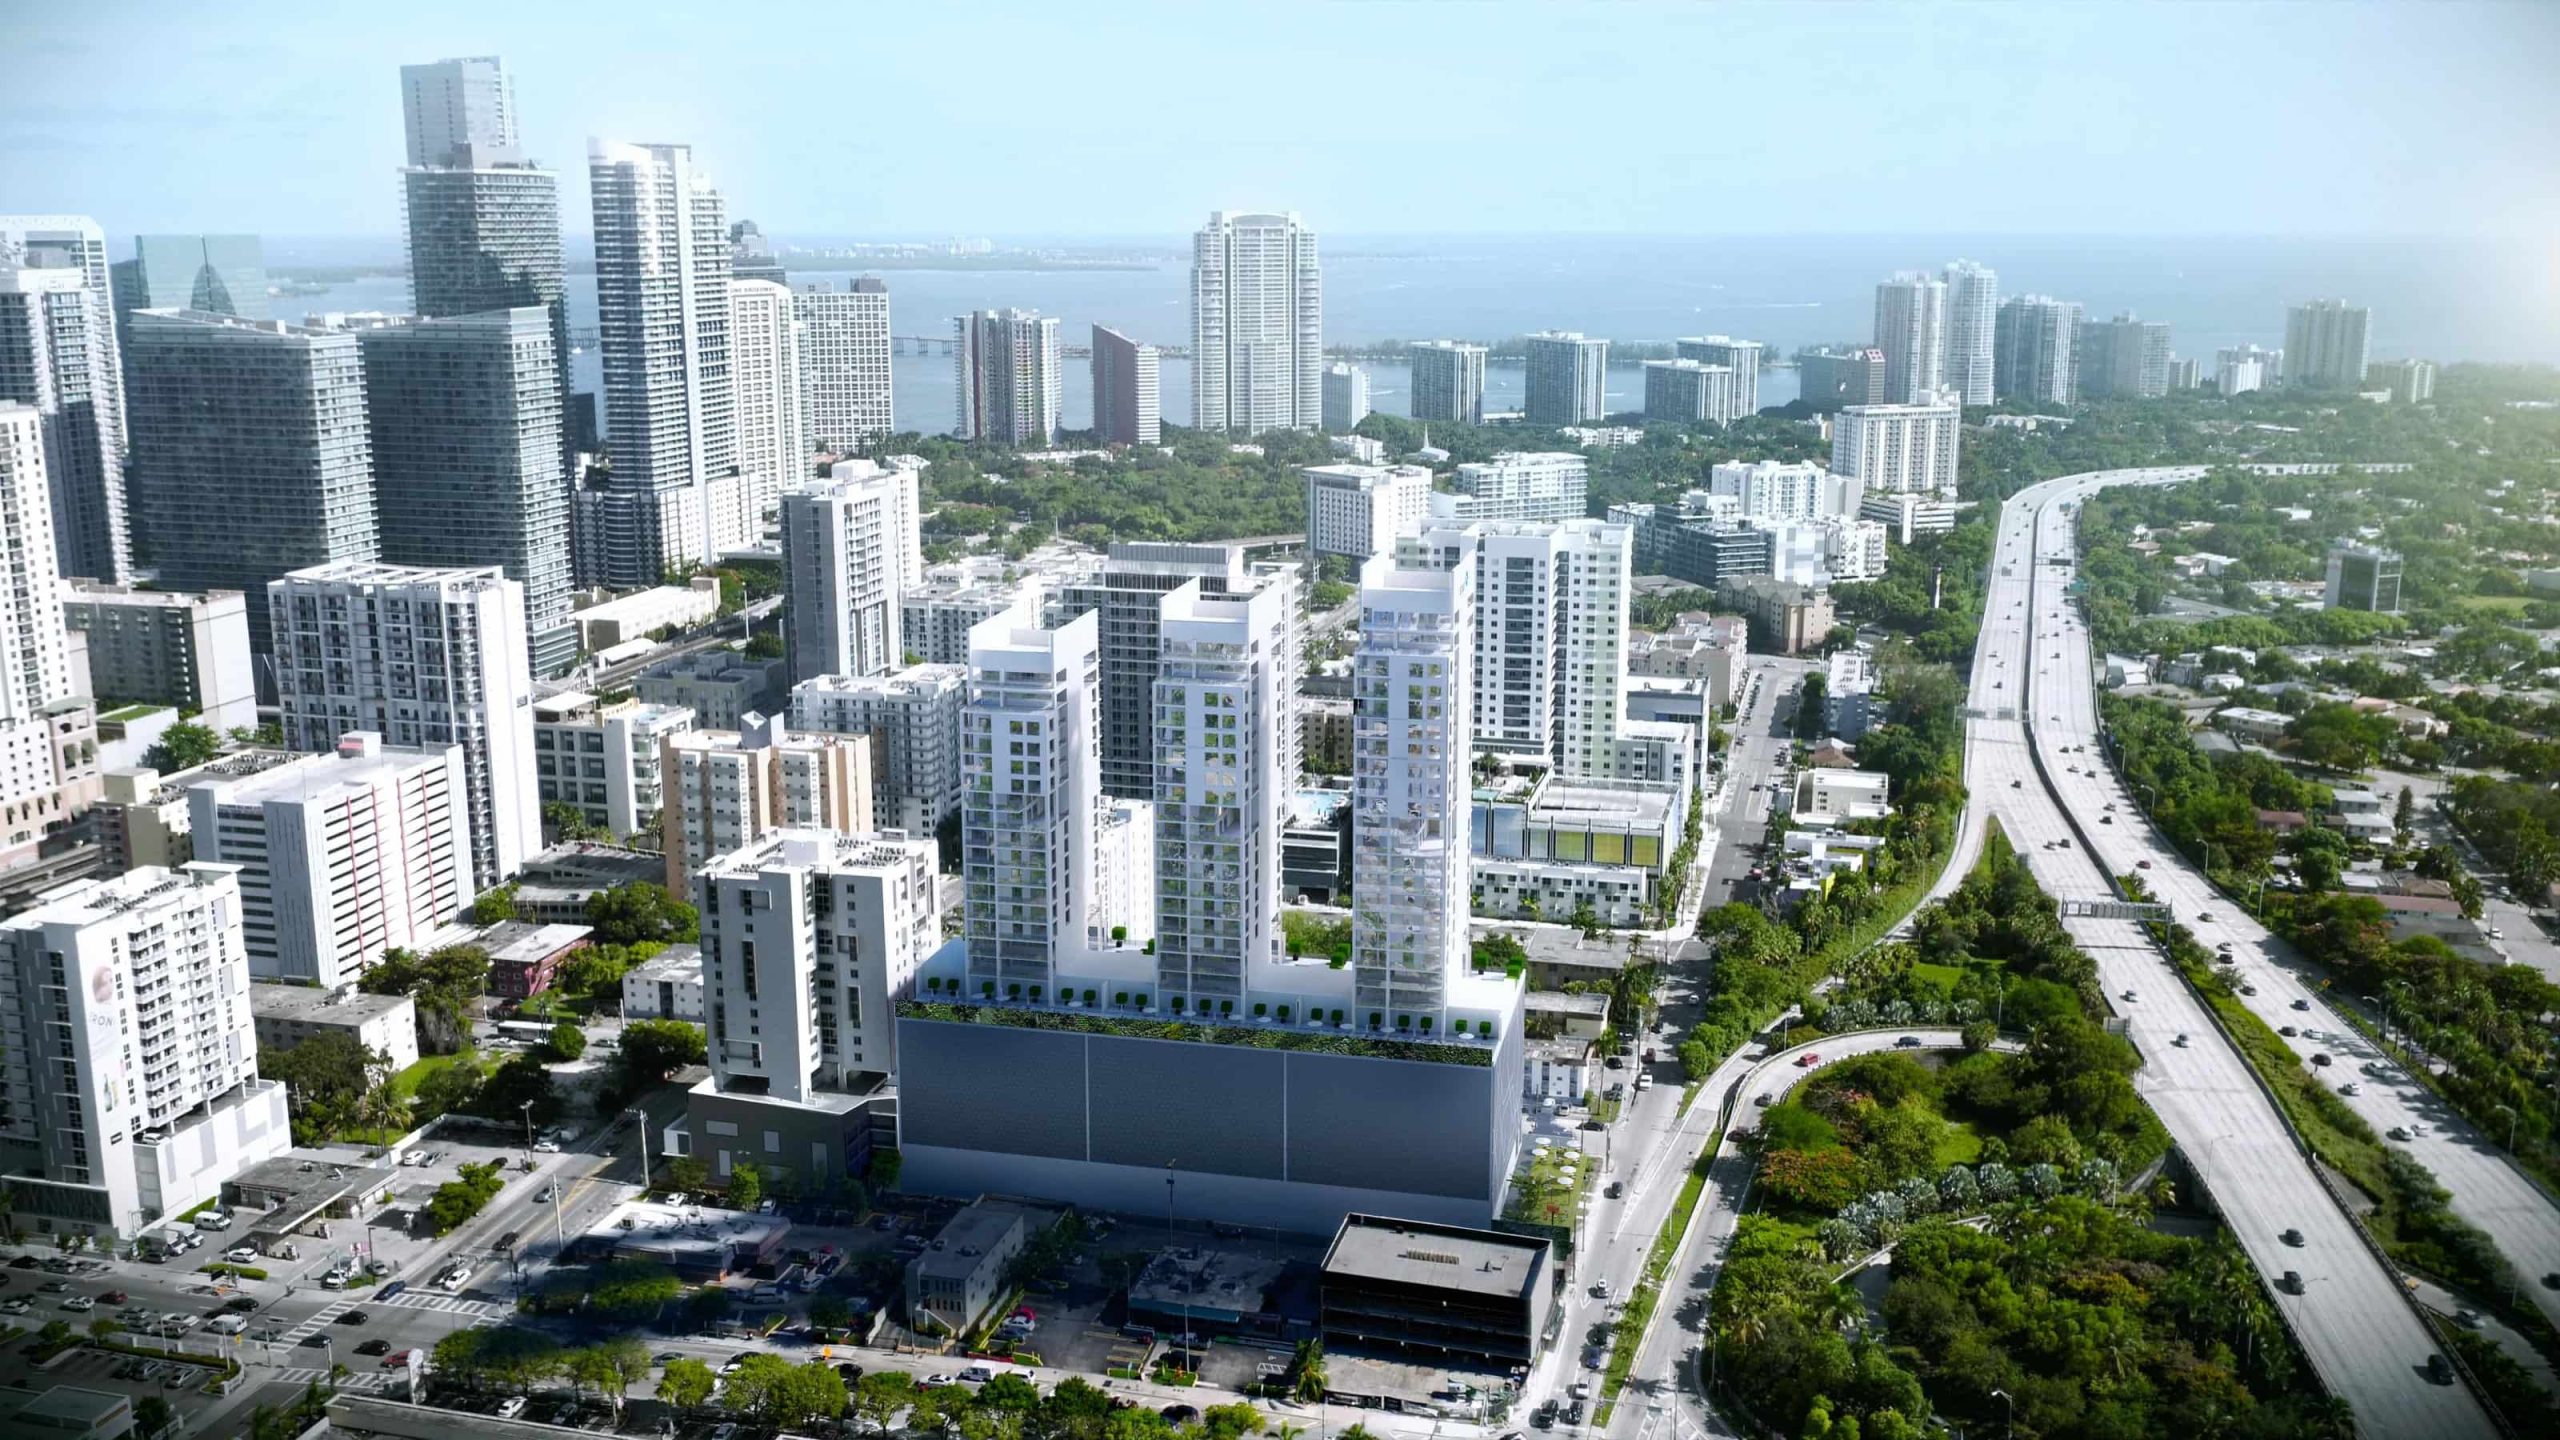 Smart Brickell hotel and residential complex coming to Miami